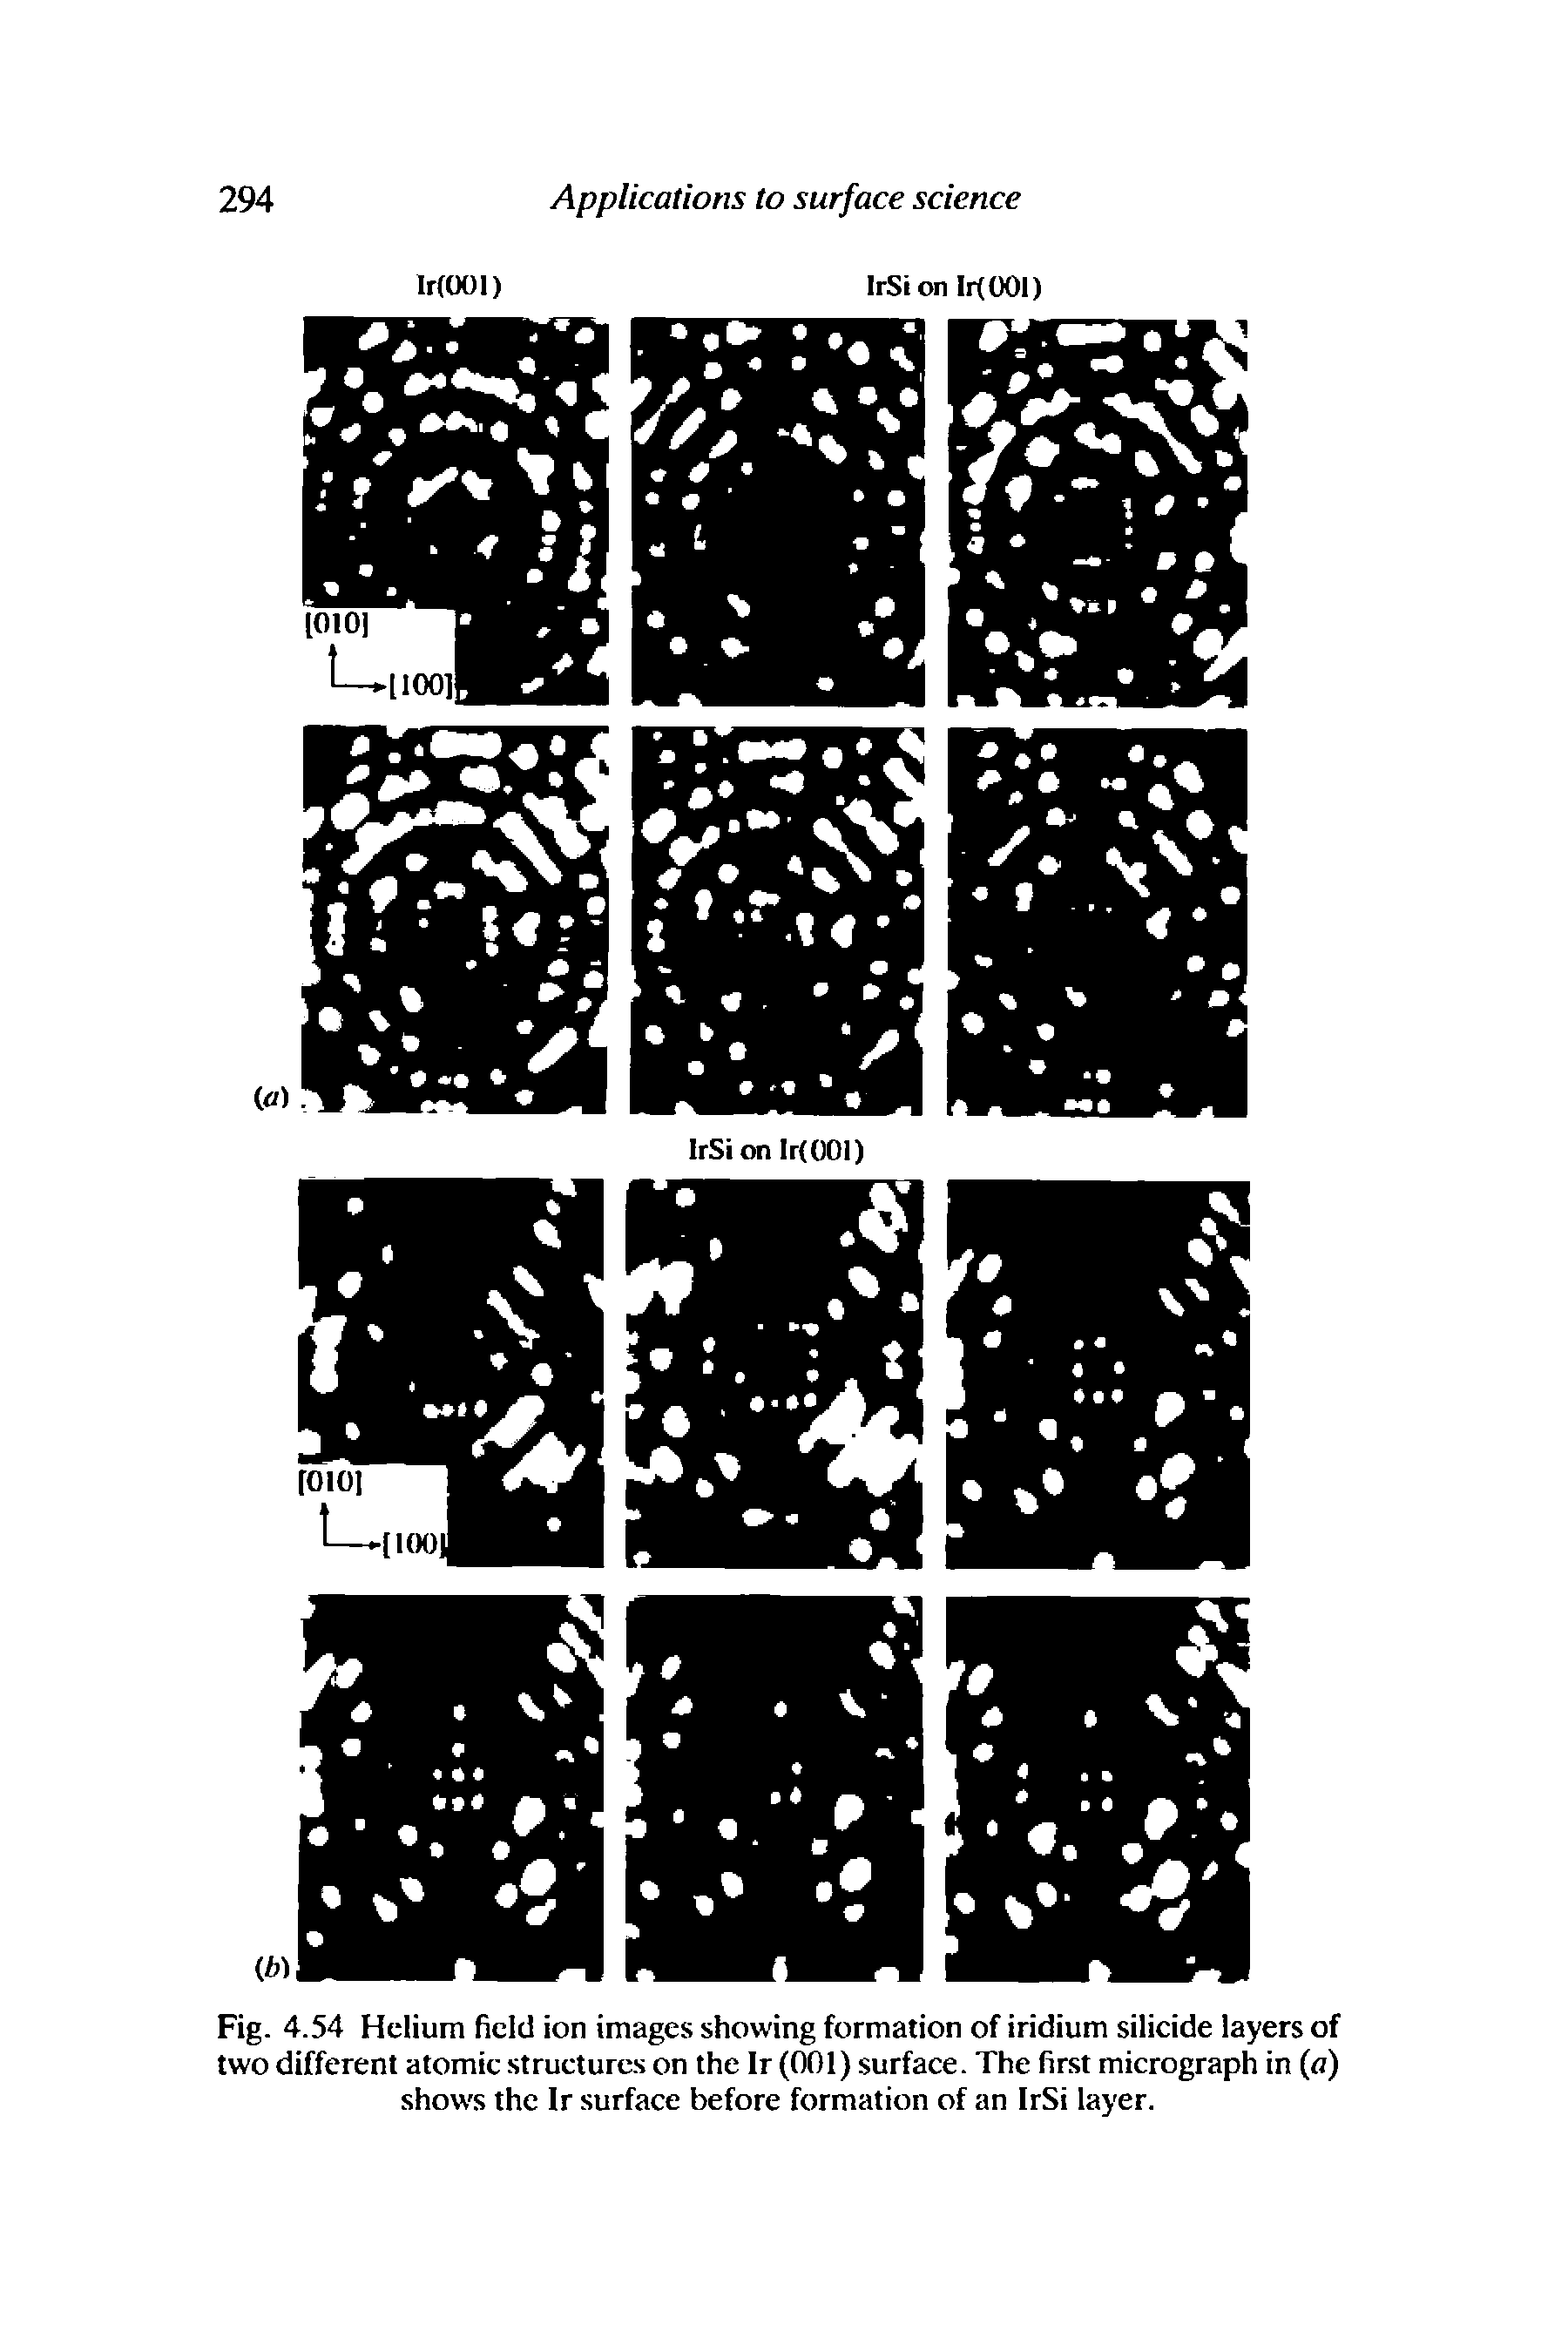 Fig. 4. 54 Helium field ion images showing formation of iridium silicide layers of two different atomic structures on the Ir (001) surface. The first micrograph in (a) show s the Ir surface before formation of an IrSi layer.